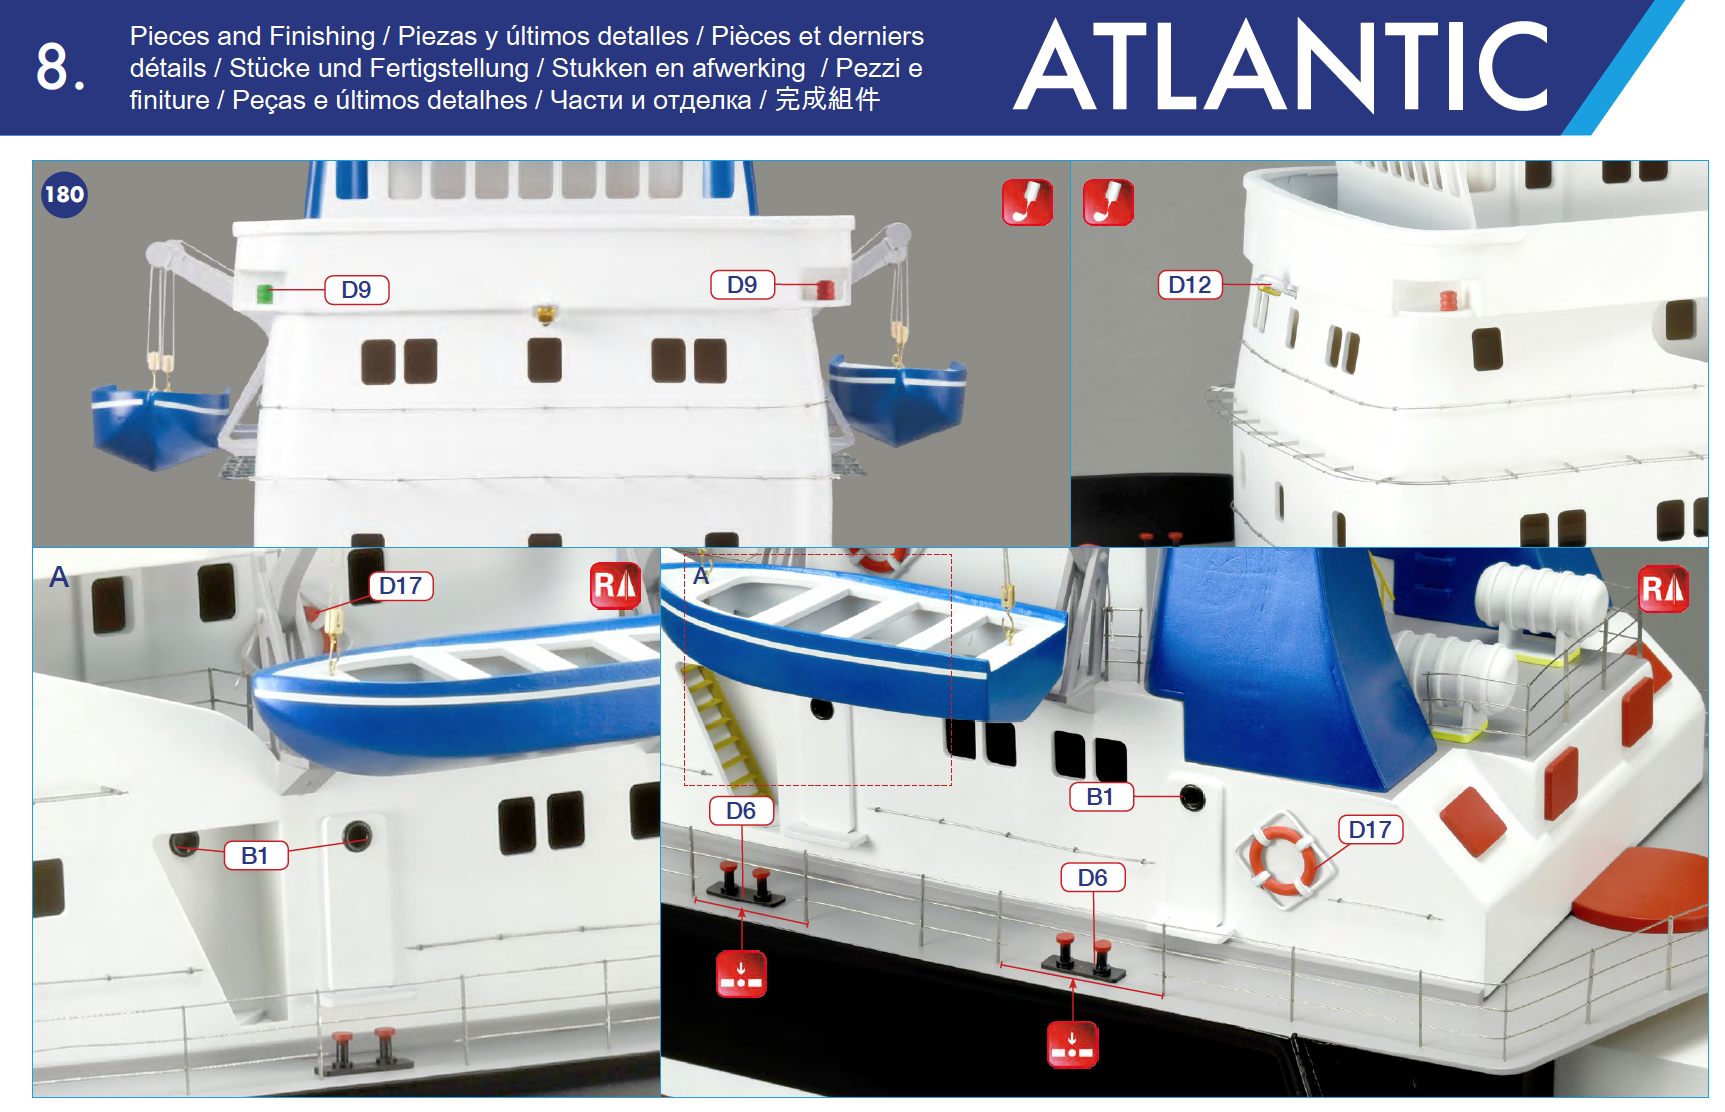 Assembly Guide for Atlantic (20210) by Artesanía Latina.